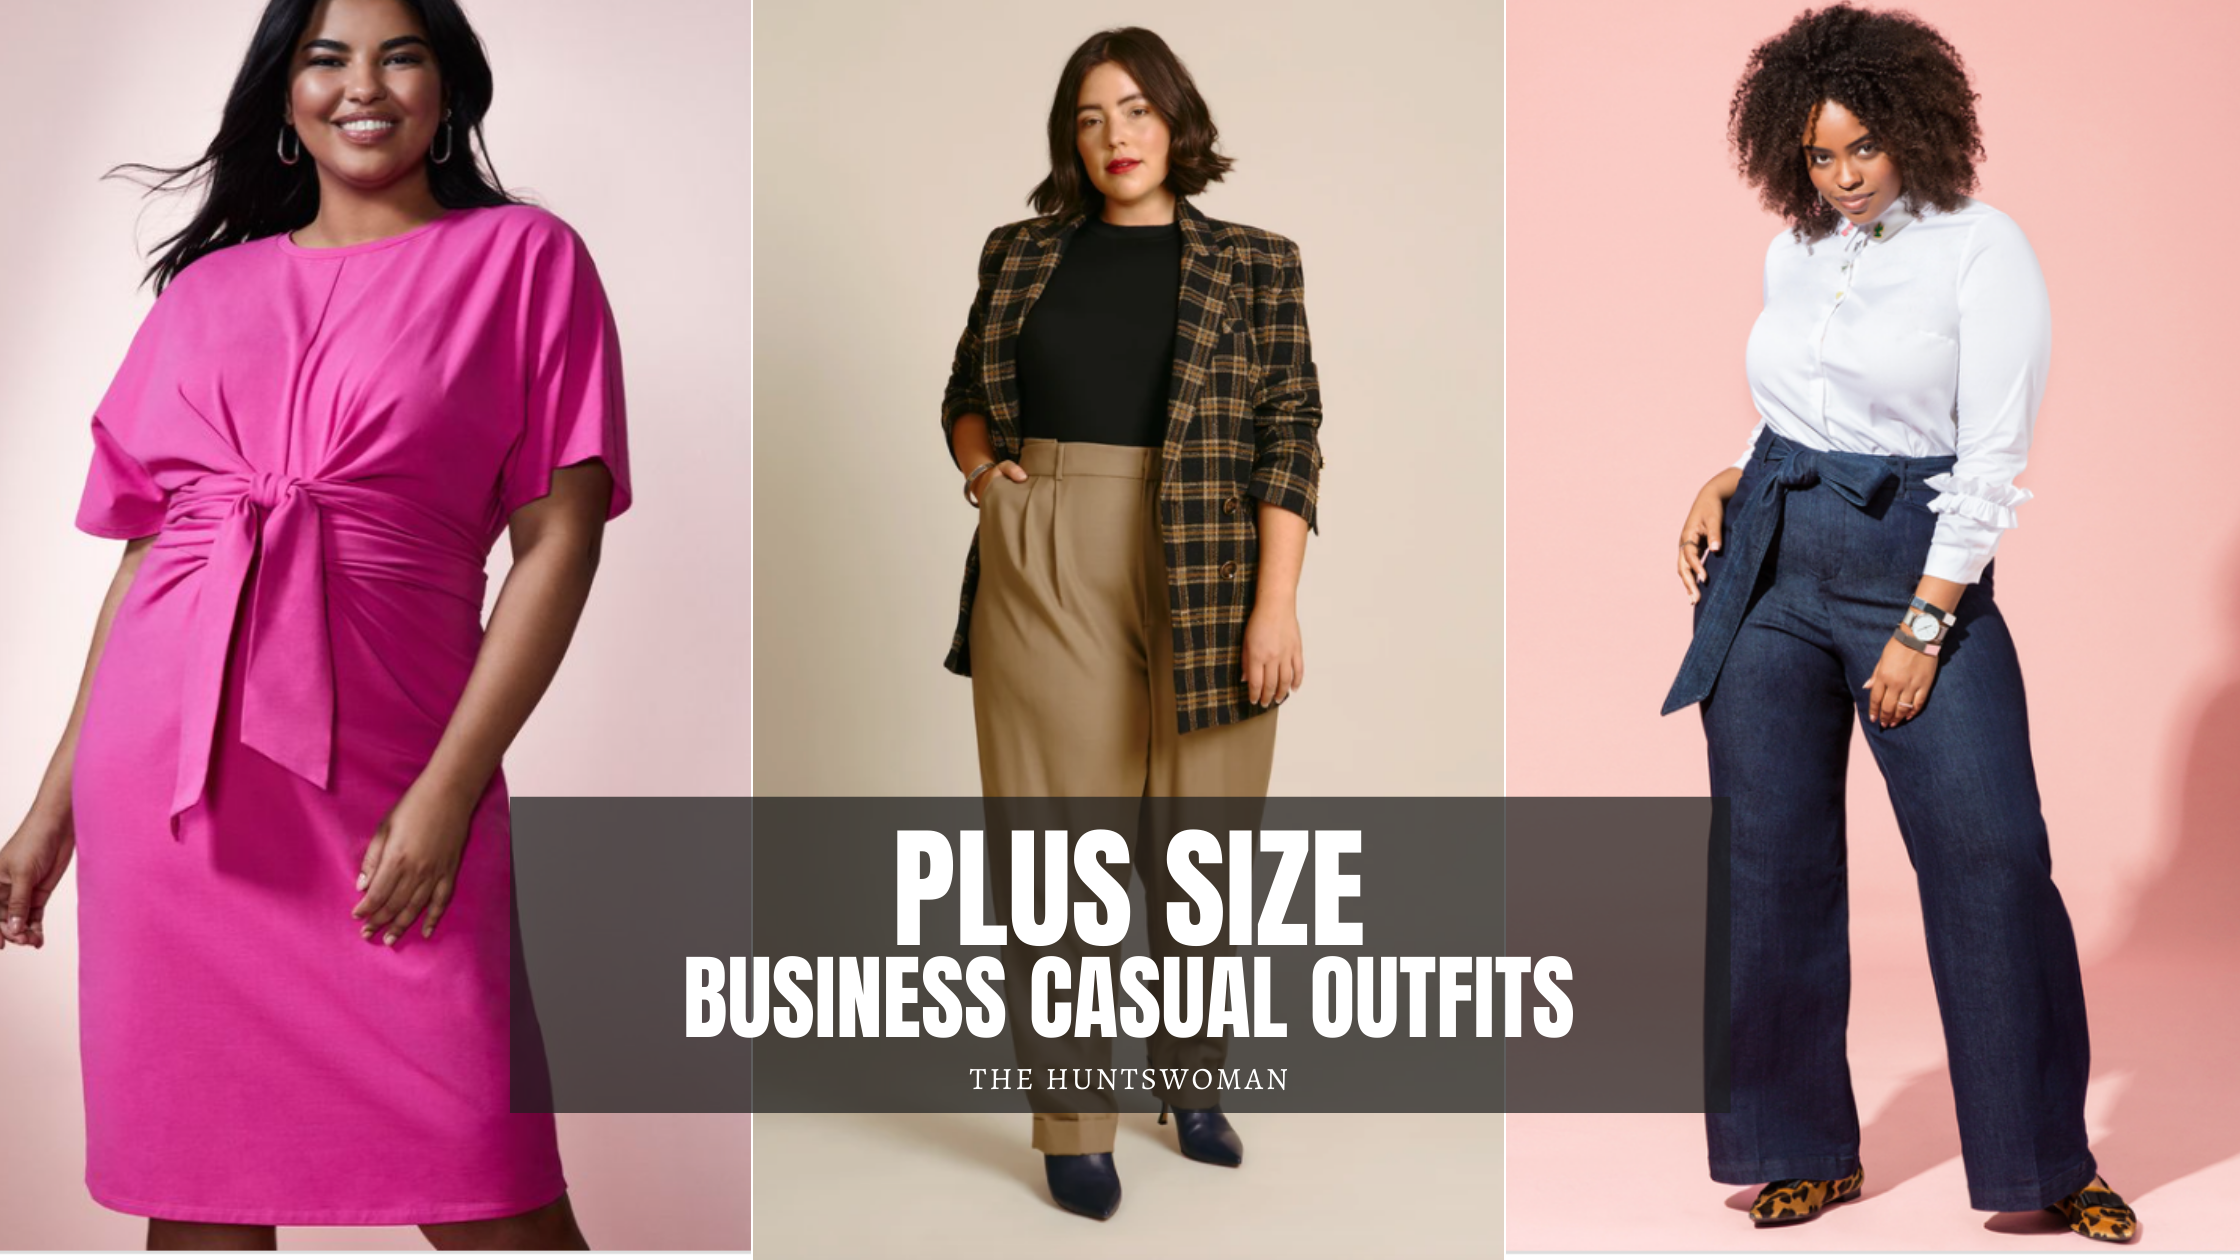 15+ Plus Size Business Casual Outfits - Ideas & Inspiration - The Huntswoman